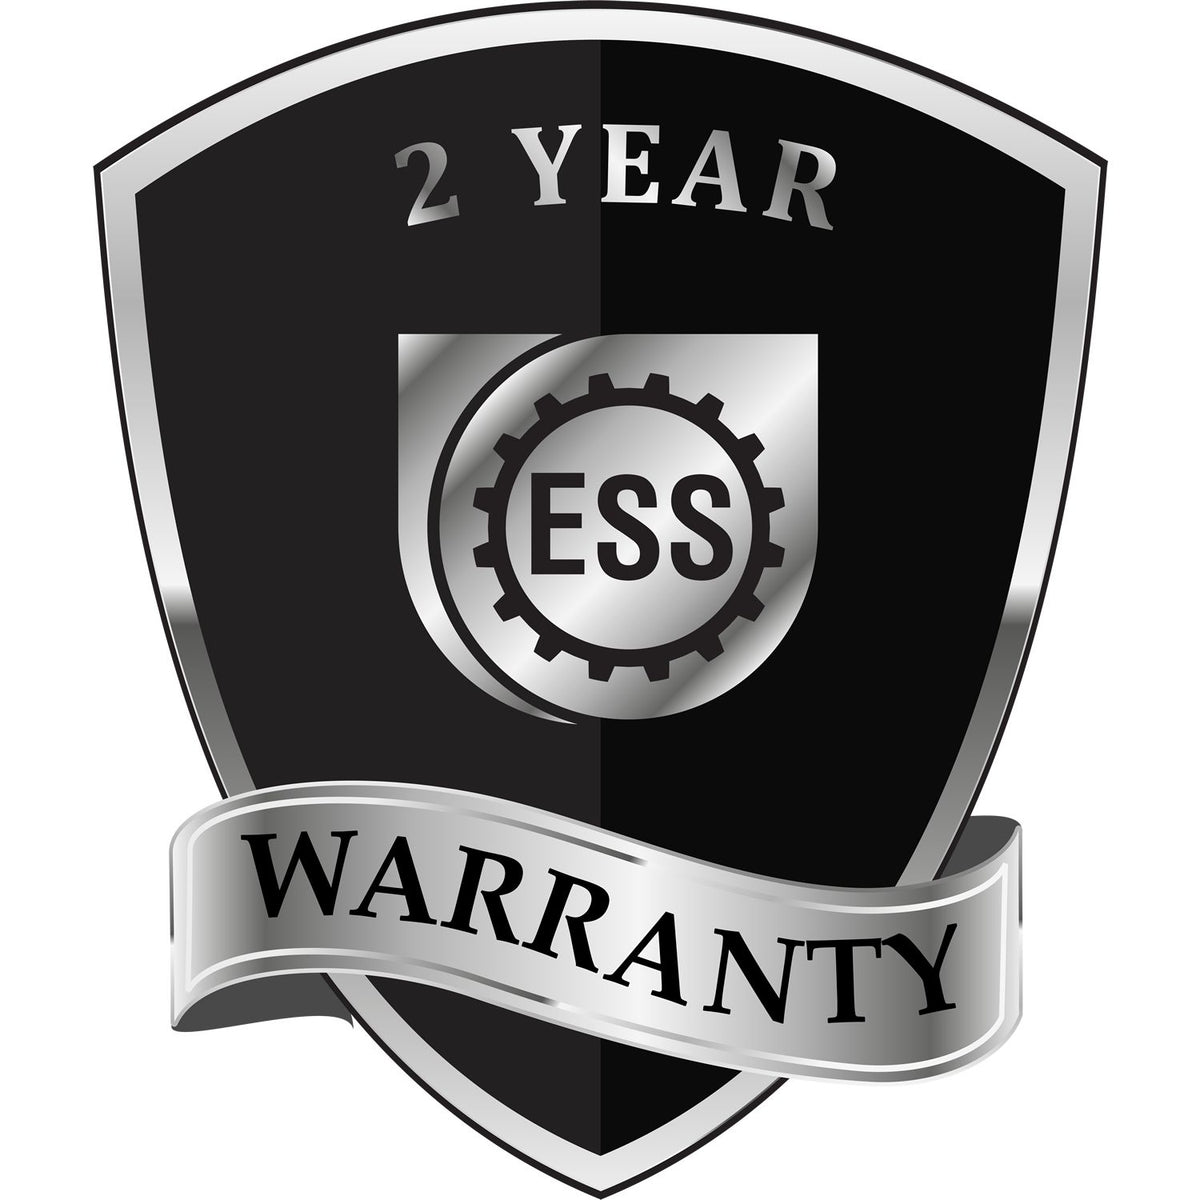 A black and silver badge or emblem showing warranty information for the Gift Iowa Land Surveyor Seal